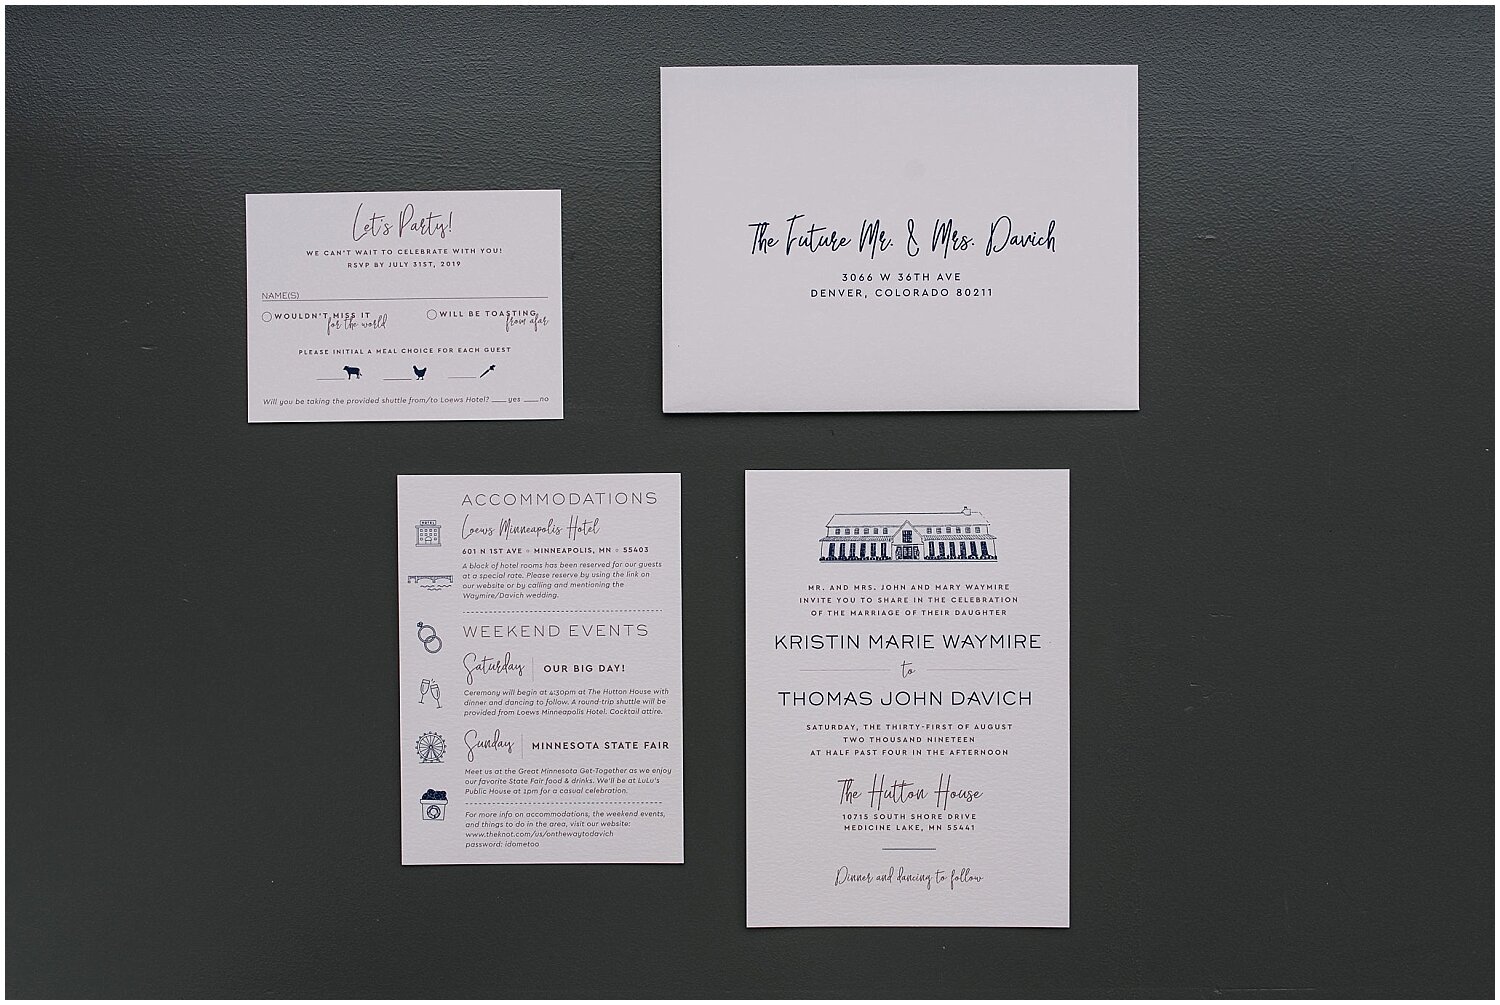  Wedding invitations and rsvp for MPLS wedding 